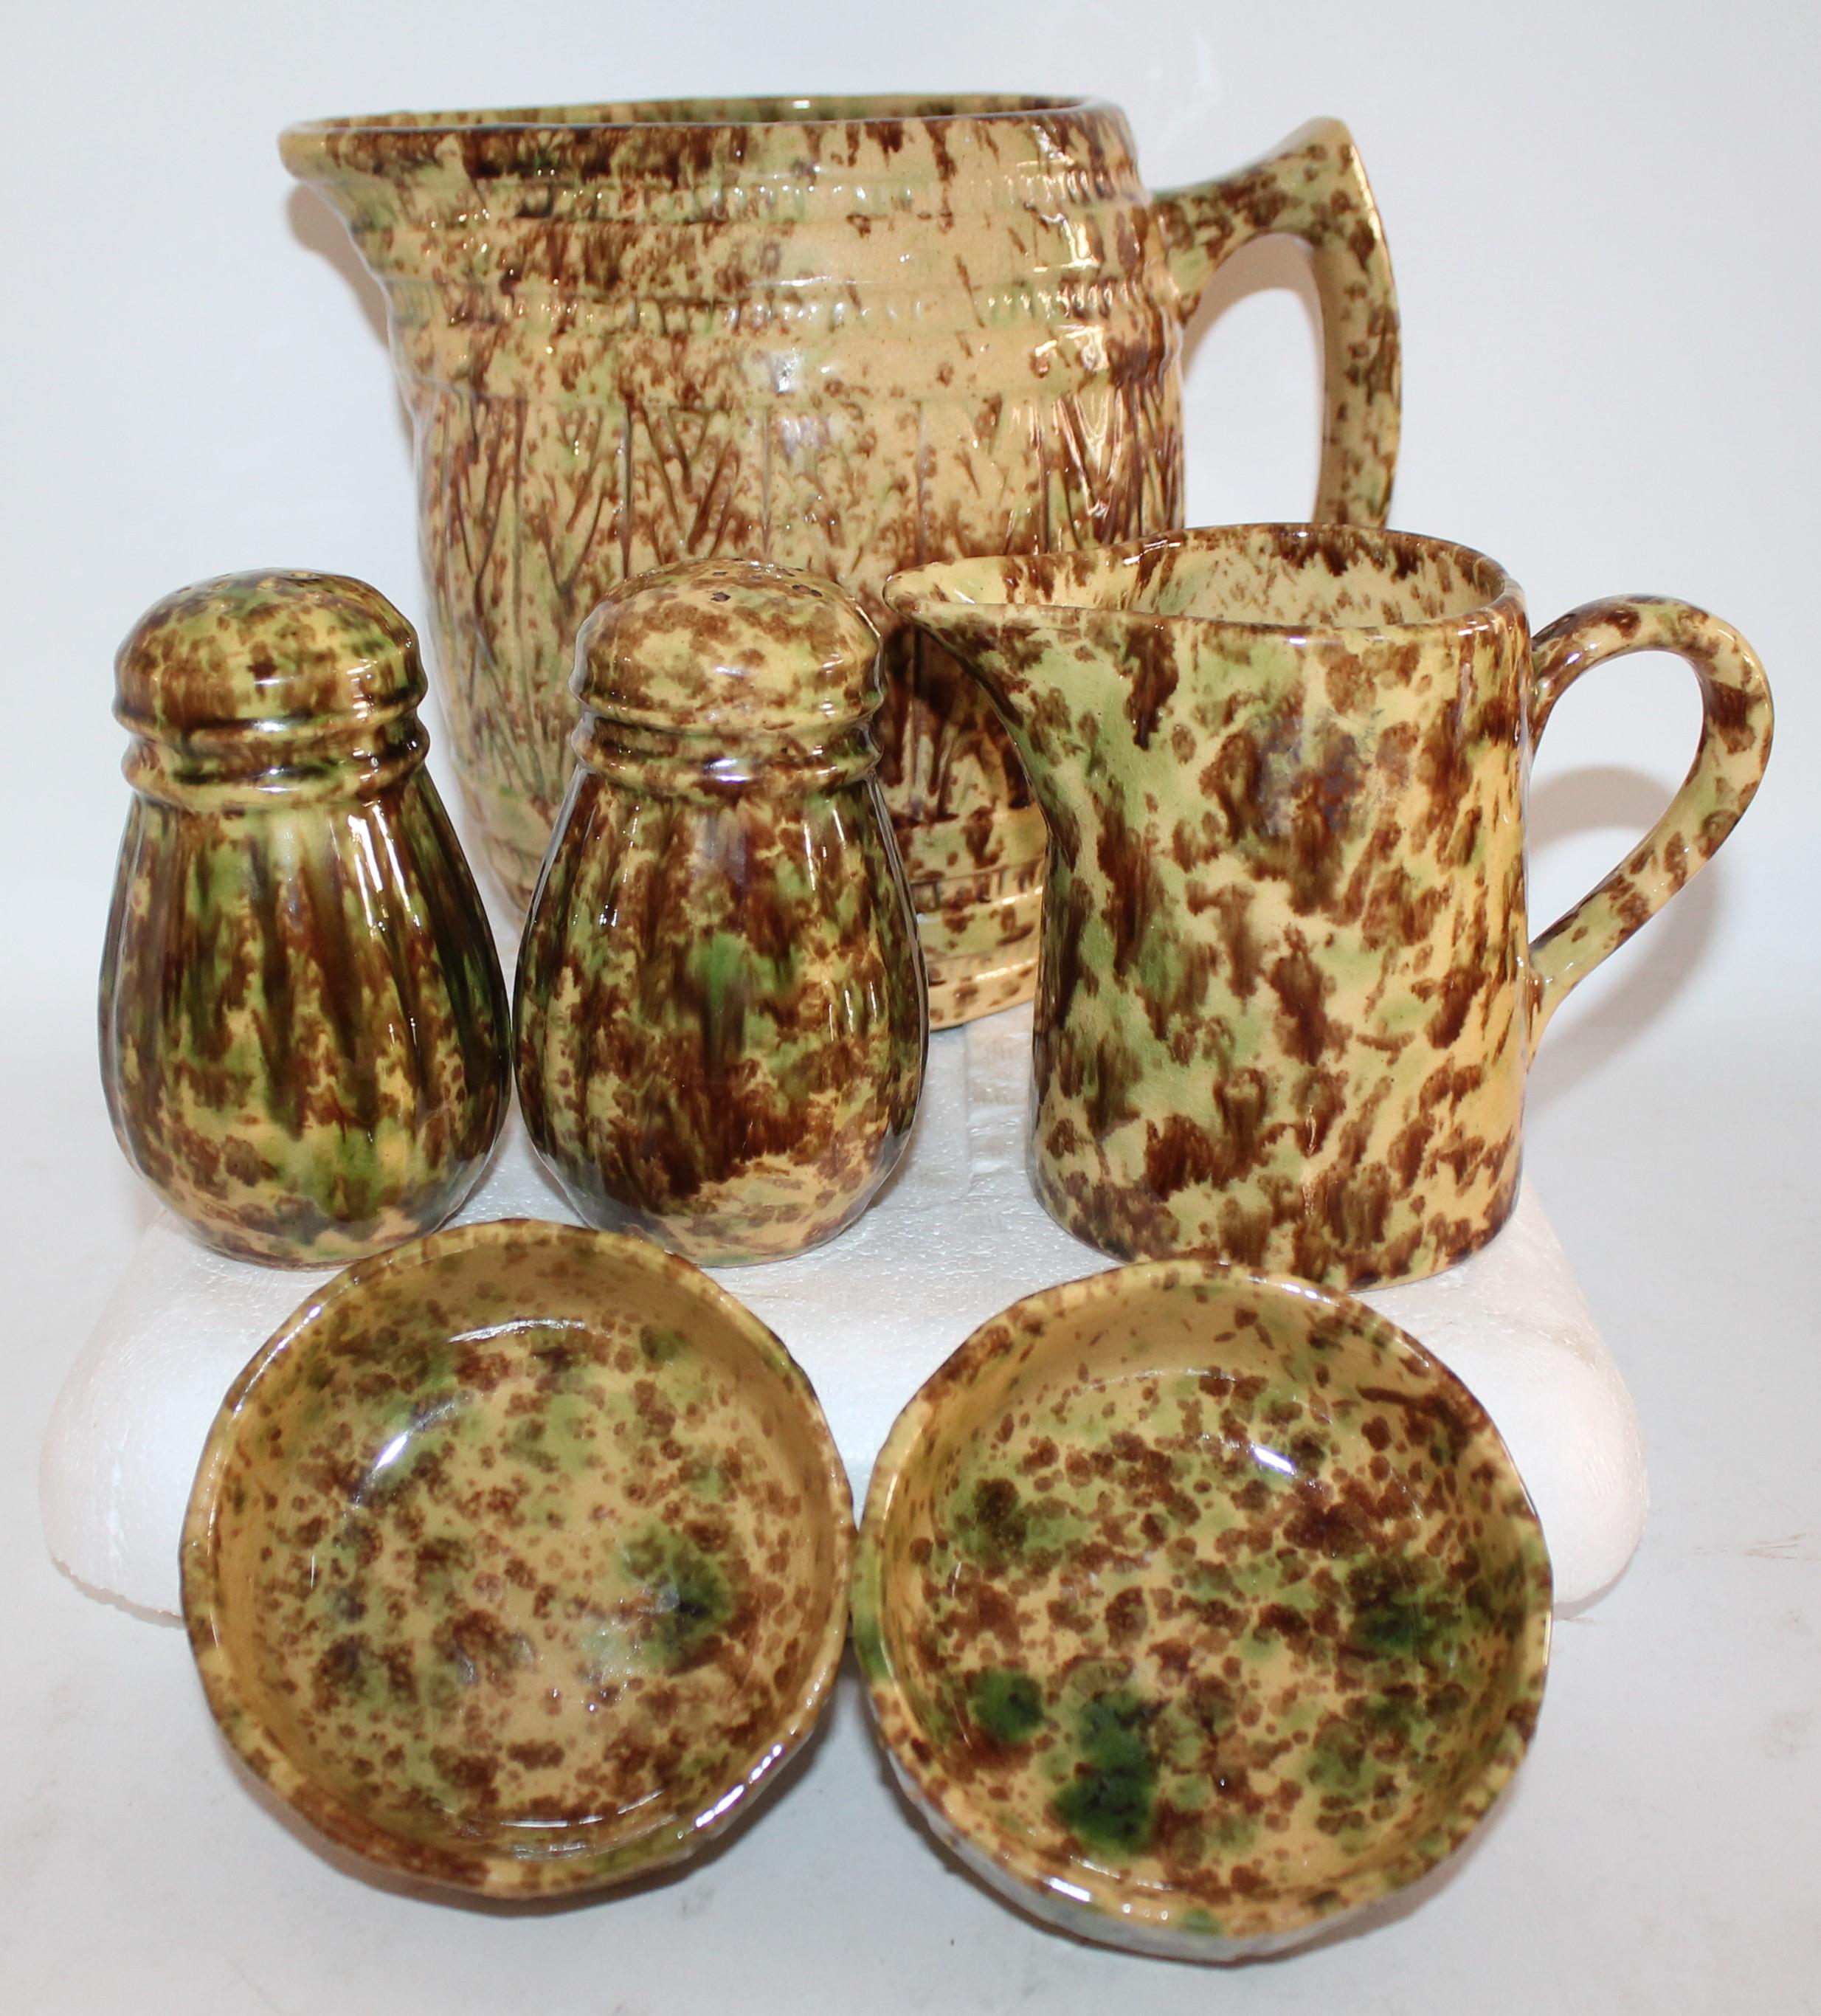 This collection of Bennington pottery is from New England and is all in very good condition. It is like a form of yellow ware with brown and green sponged glaze. This was made in Bennington, Vermont in the late 19th century. It is very rare to find